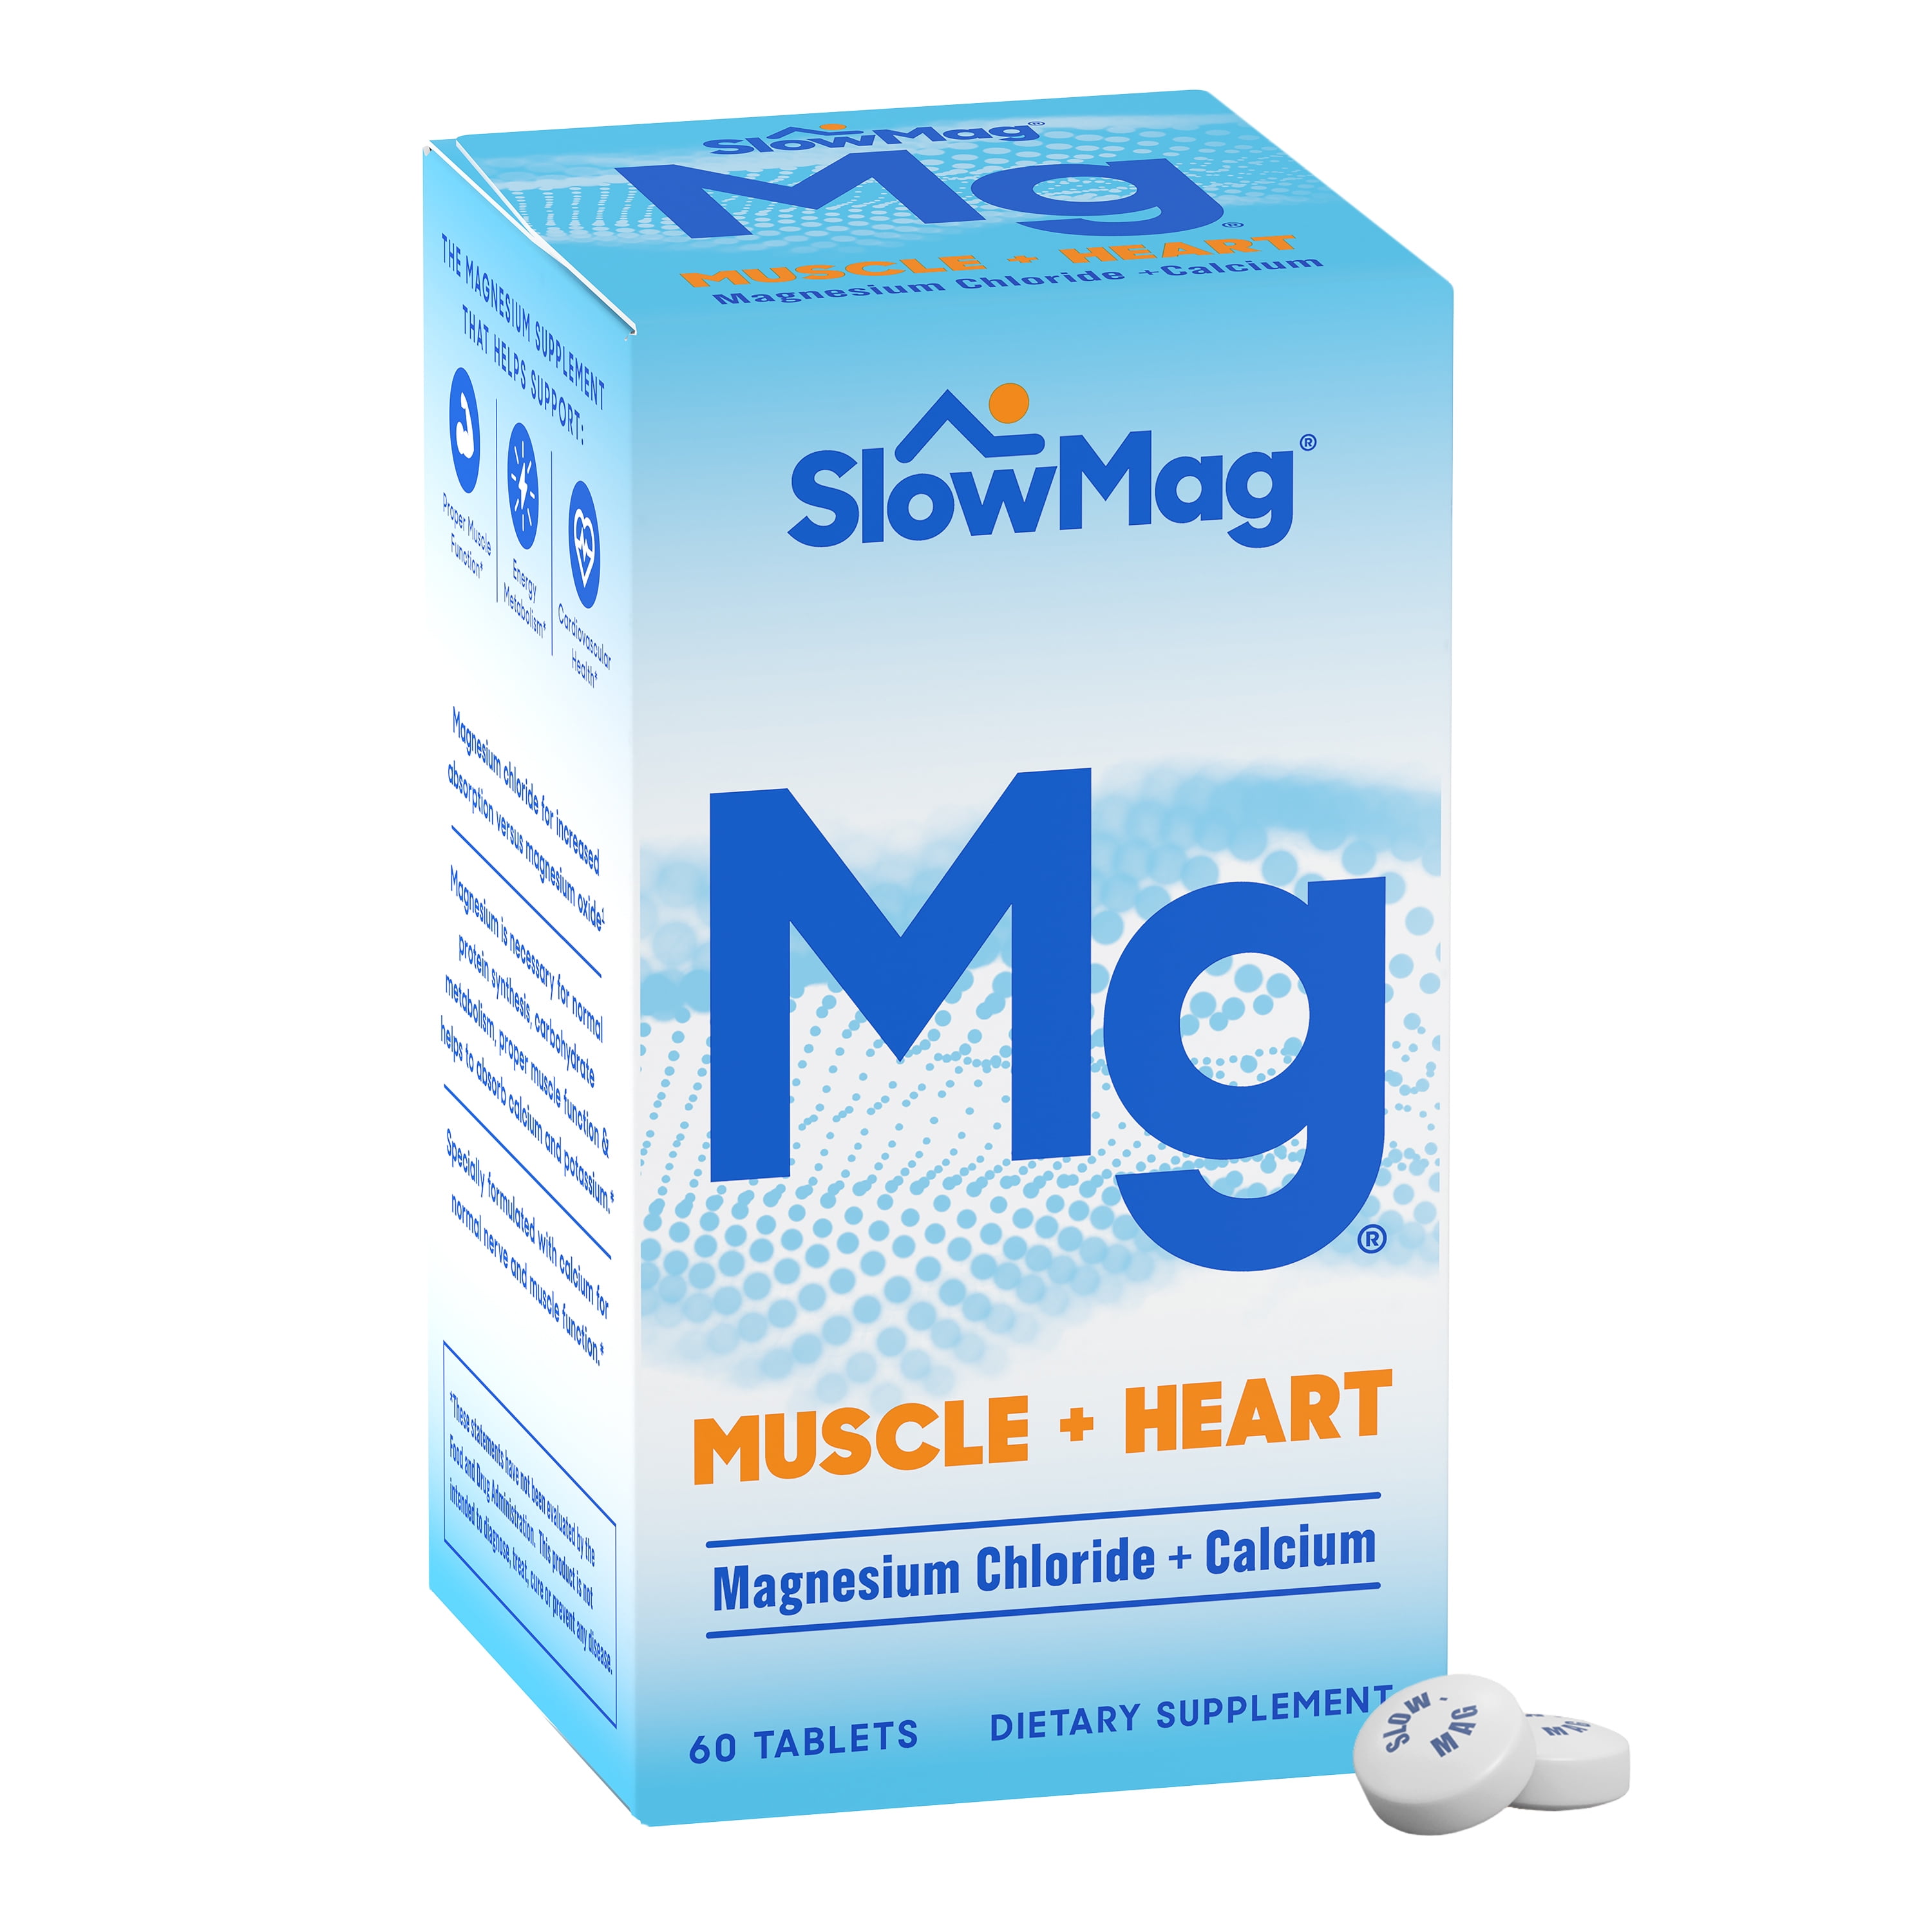 SlowMag Mg Muscle + Heart Magnesium Chloride Supplement Tablets with Calcium 60ct